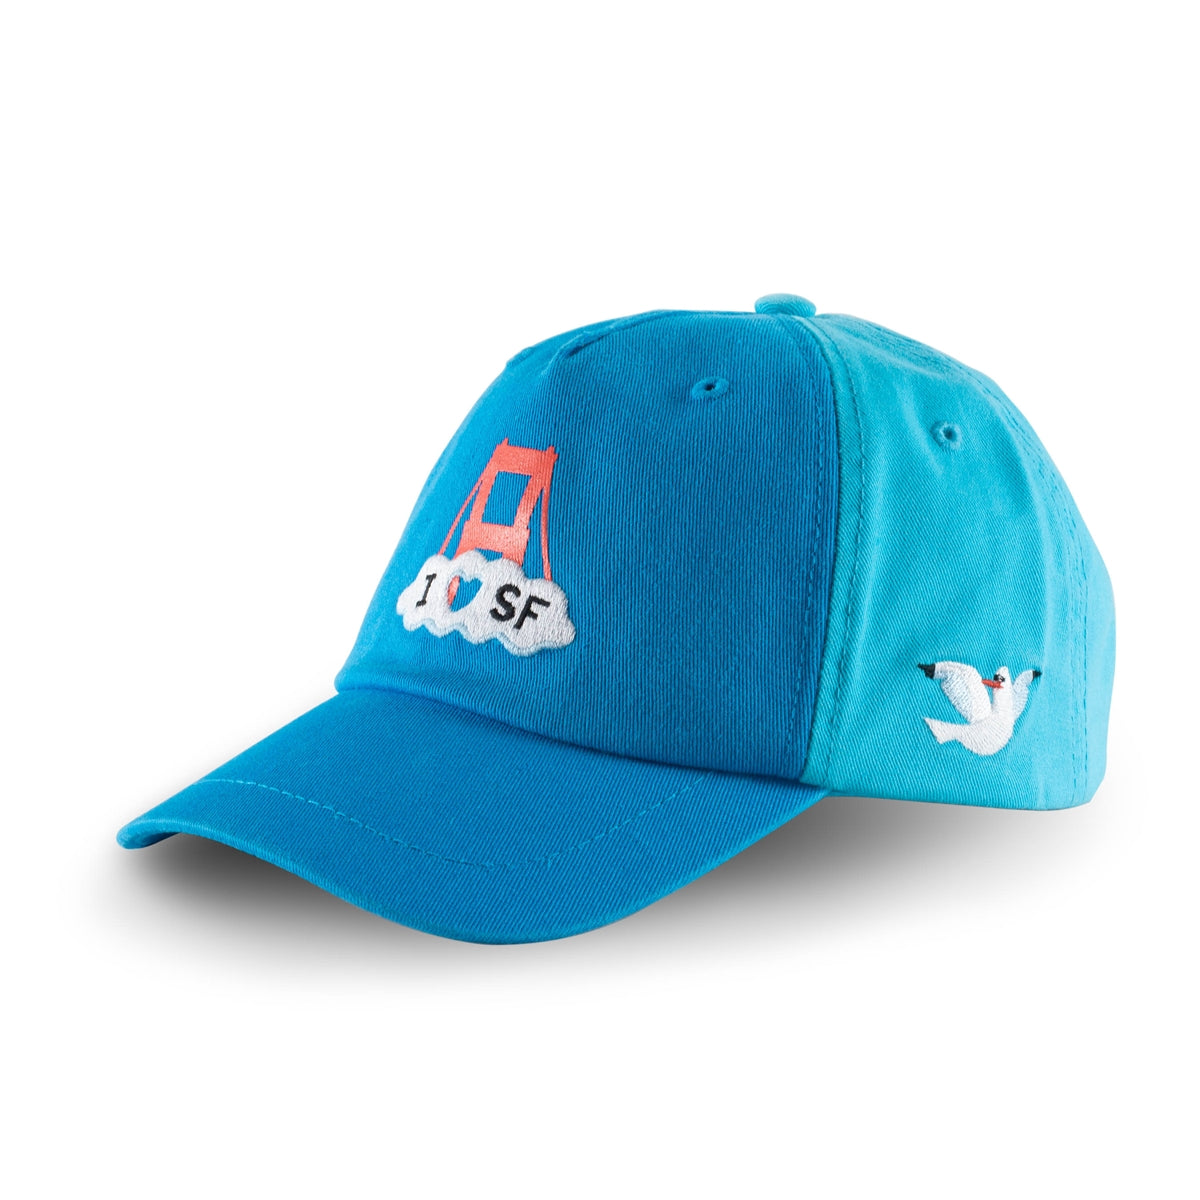 Light blue kids baseball cap with screen-printed and embroidered I Heart San Francisco and Golden Gate Bridge design details.